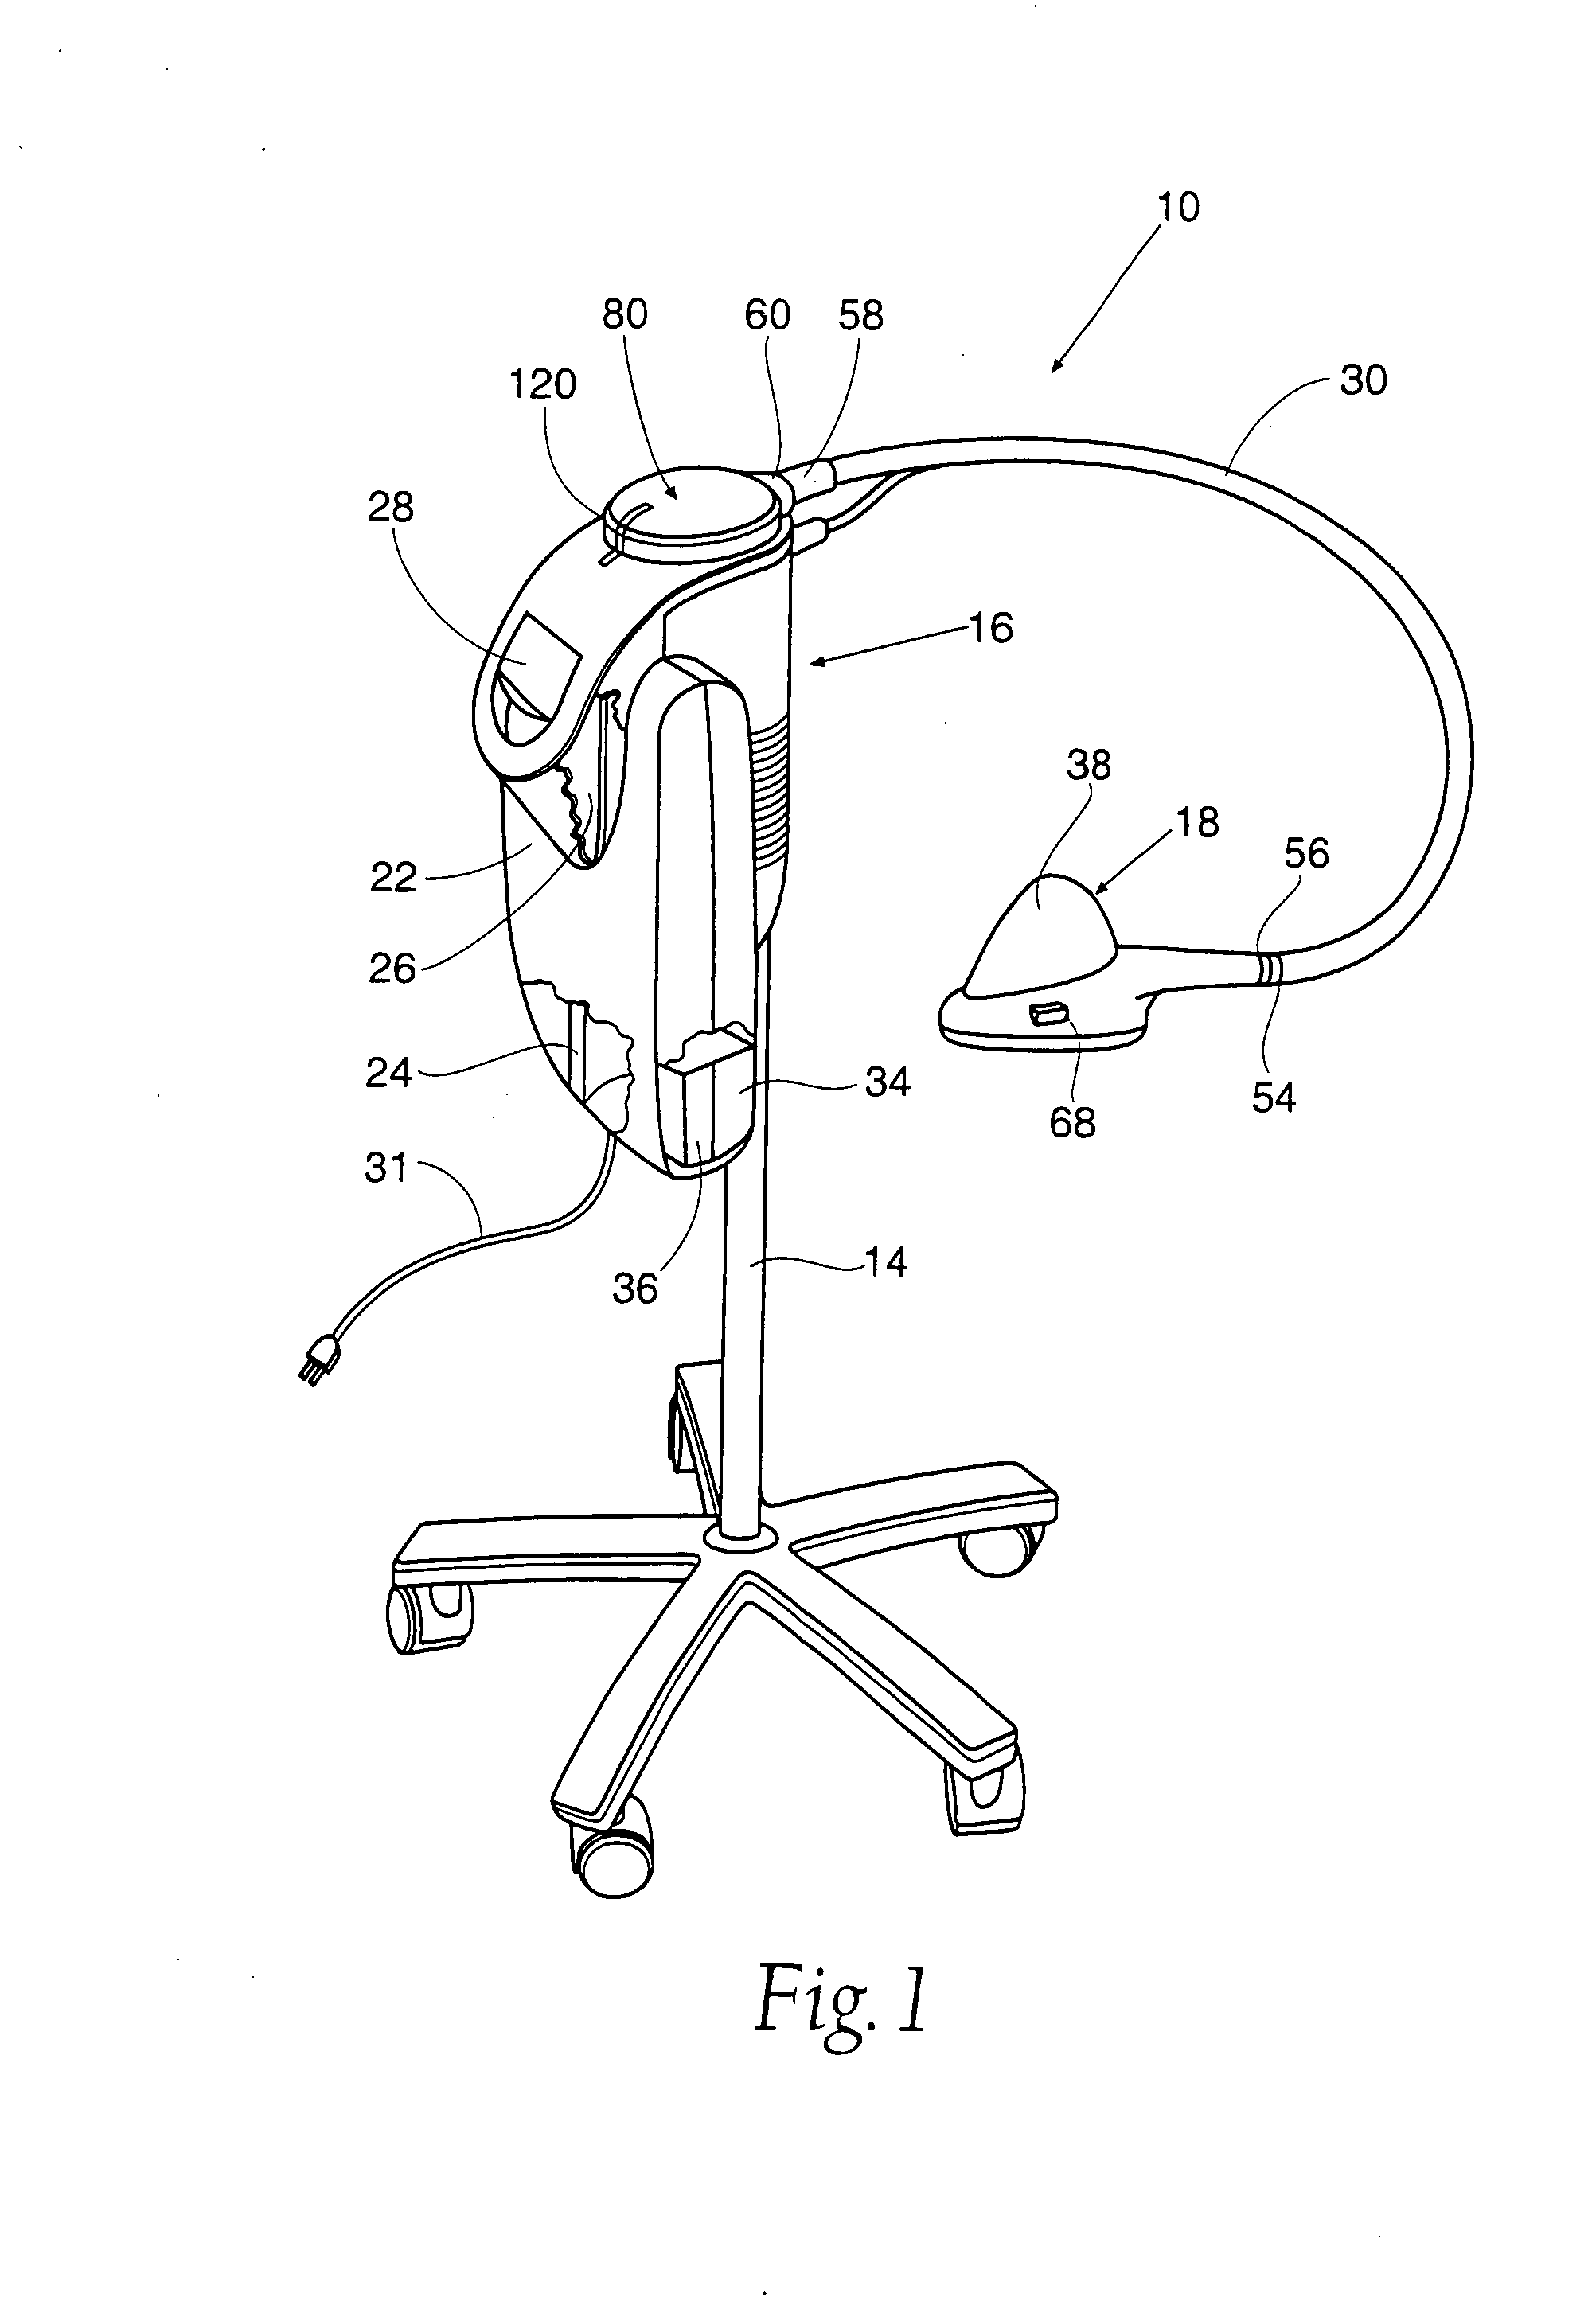 Systems and methods for applying ultrasonic energy to the thoracic cavity